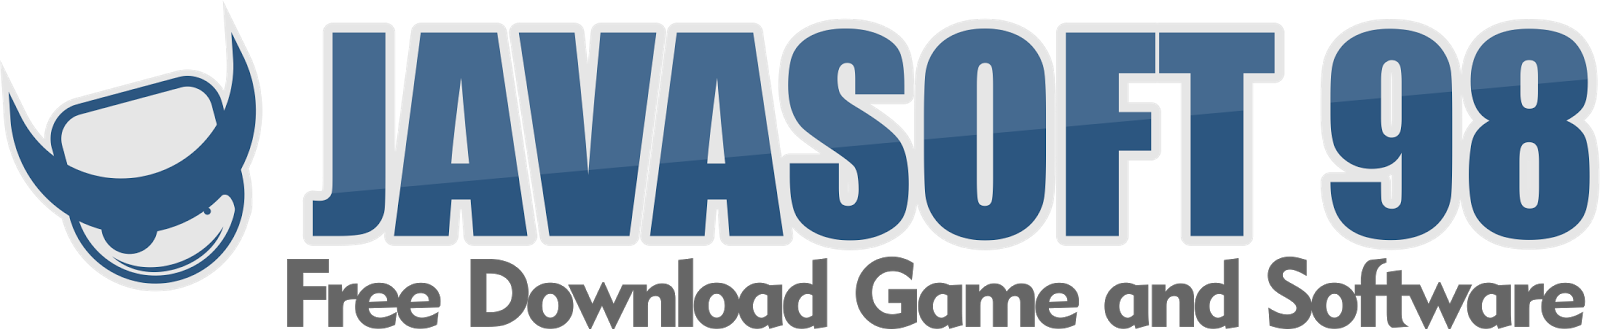 JAVASOFT98 | Free Download Game and Software